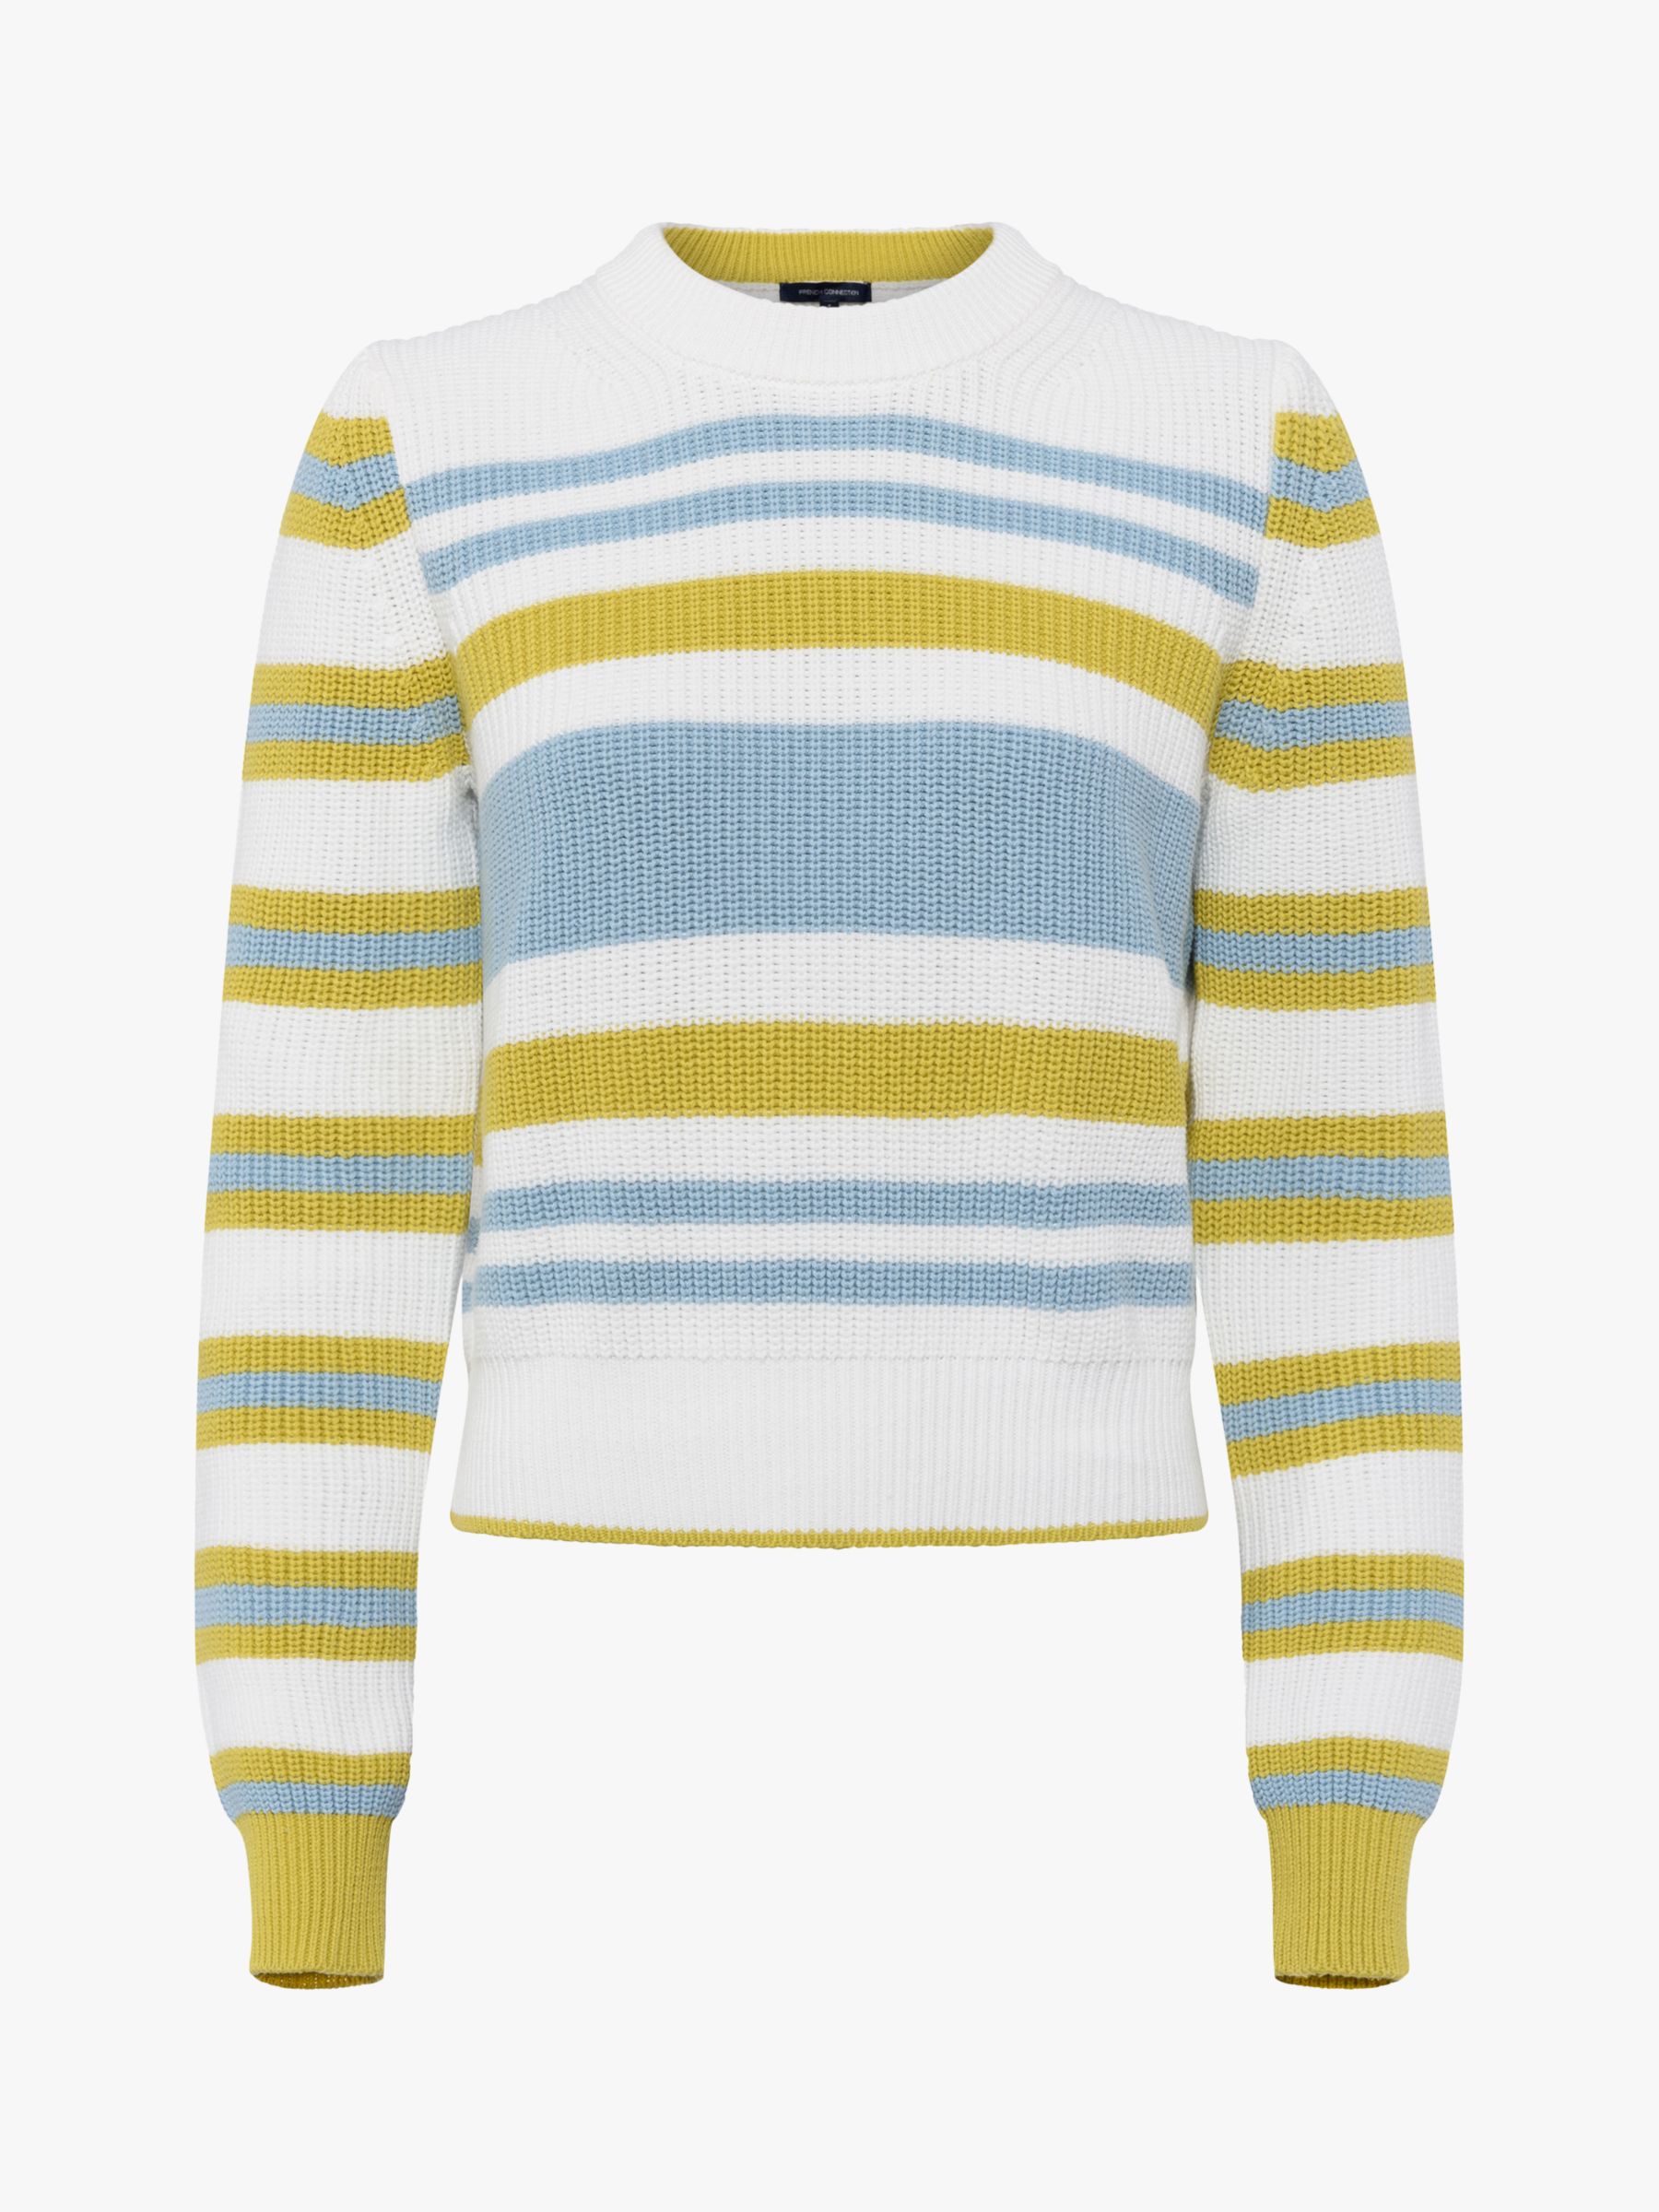 French Connection Kim Stripe Jumper, White/Multi at John Lewis & Partners